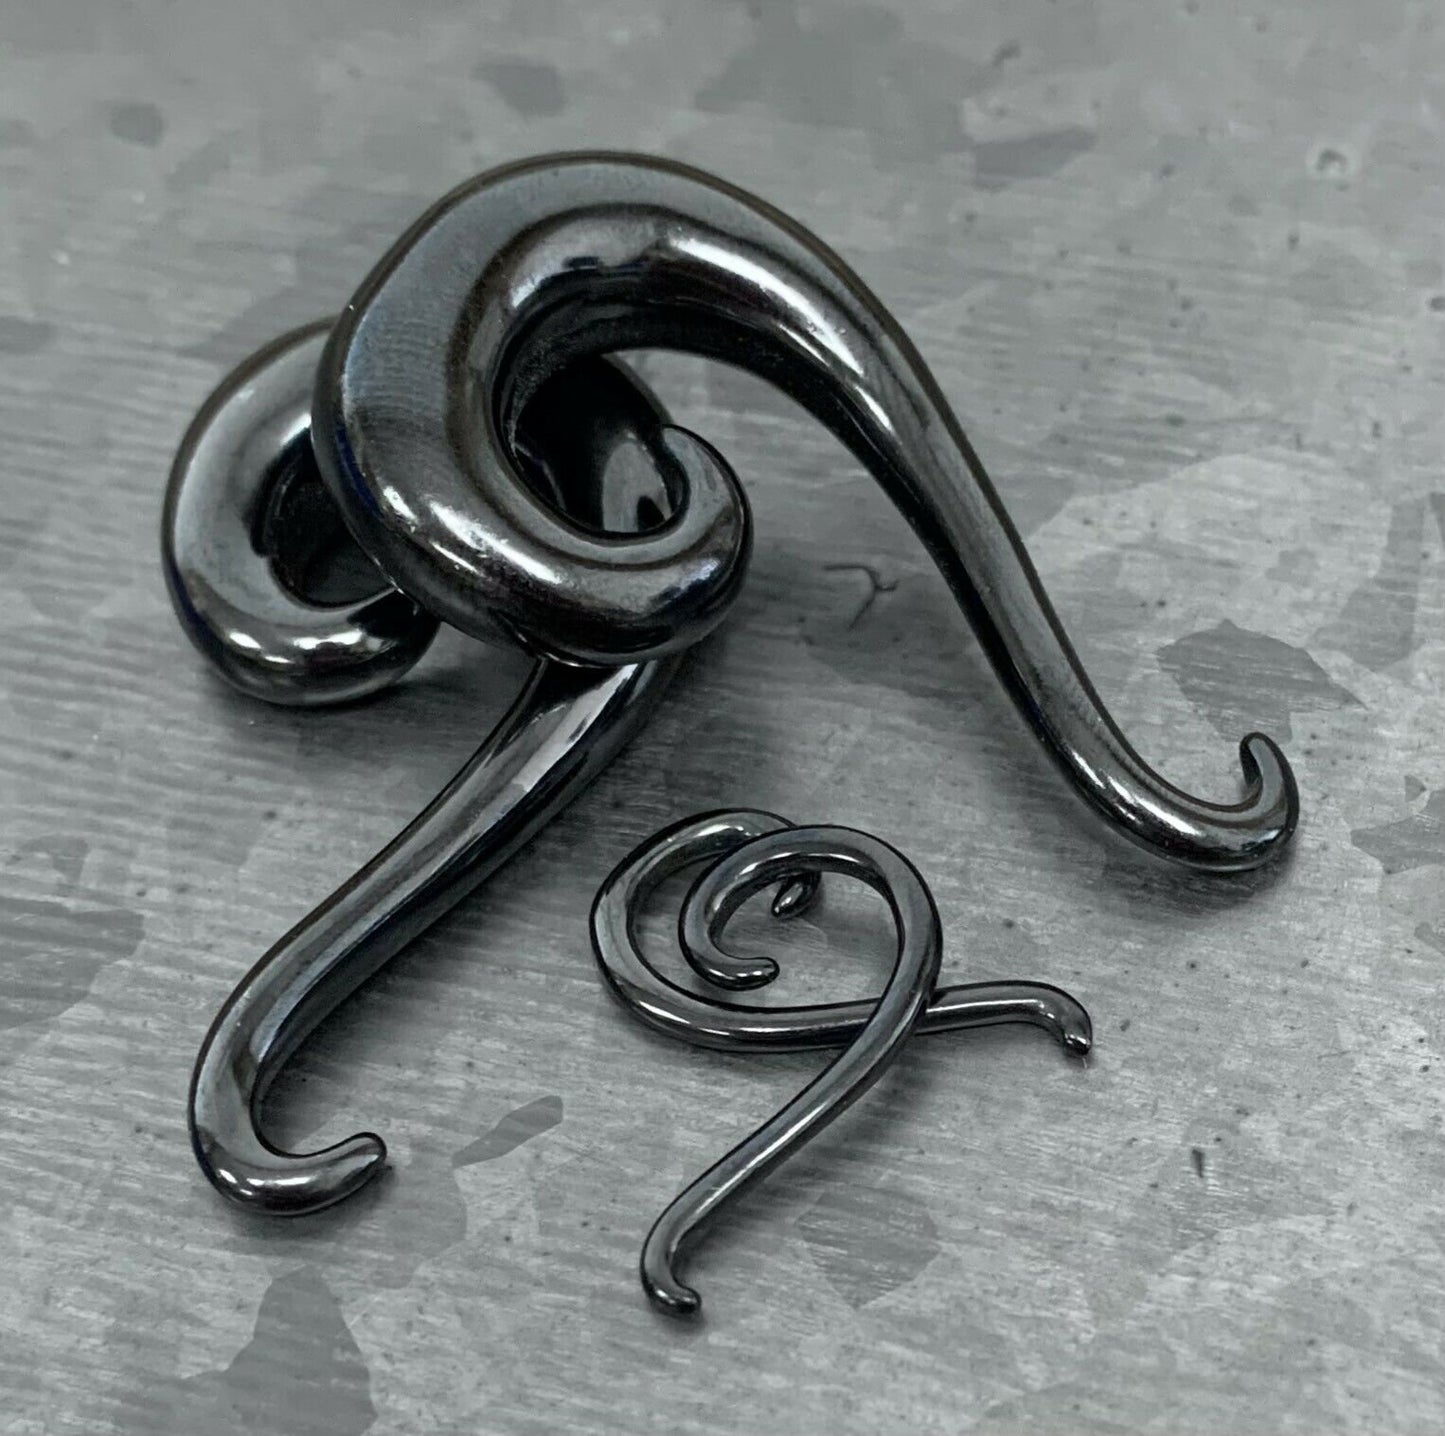 PAIR of Unique Black Swirl Hook Steel Spiral Tapers Gauges 14g (1.6mm) thru 2g (6mm) available!